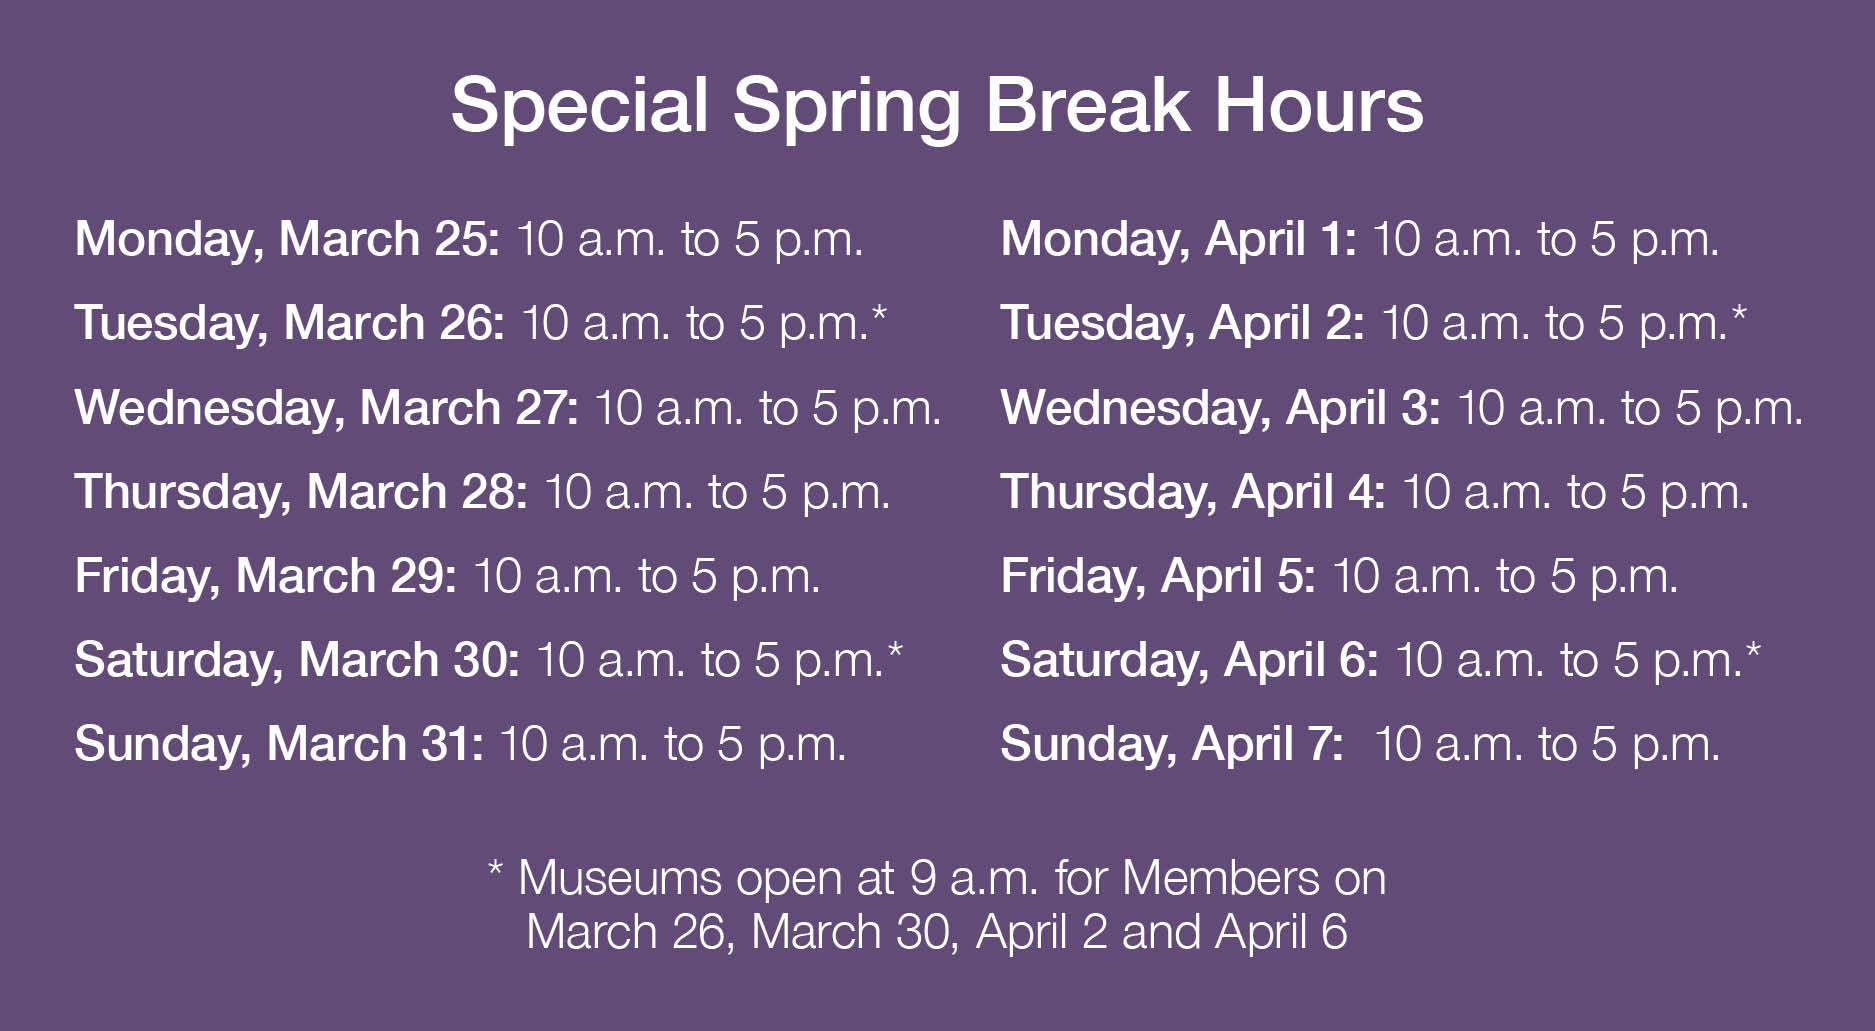 Special Spring Break Hours. Monday, March 25: 10 a.m. to 5 p.m.; Tuesday, March 26: 10 a.m. to 5 p.m.*; Wednesday, March 27: 10 a.m. to 5 p.m.; Thursday, March 28: 10 a.m. to 5 p.m.; Friday, March 29: 10 a.m. to 5 p.m.; Saturday, March 30: 10 a.m. to 5 p.m.*; Sunday, March 31: 10 a.m. to 5 p.m.; Monday, April 1: 10 a.m. to 5 p.m.; Tuesday, April 2: 10 a.m. to 5 p.m.*; Wednesday, April 3: 10 a.m. to 5 p.m.; Thursday, April 4: 10 a.m. to 5 p.m.; Friday, April 5: 10 a.m. to 5 p.m.; Saturday, April 6: 10 a.m. to 5 p.m.*; Sunday, April 7:  10 a.m. to 5 p.m. (* Museums open at 9am for Members on March 26, March 30, April 2 and April 6.)